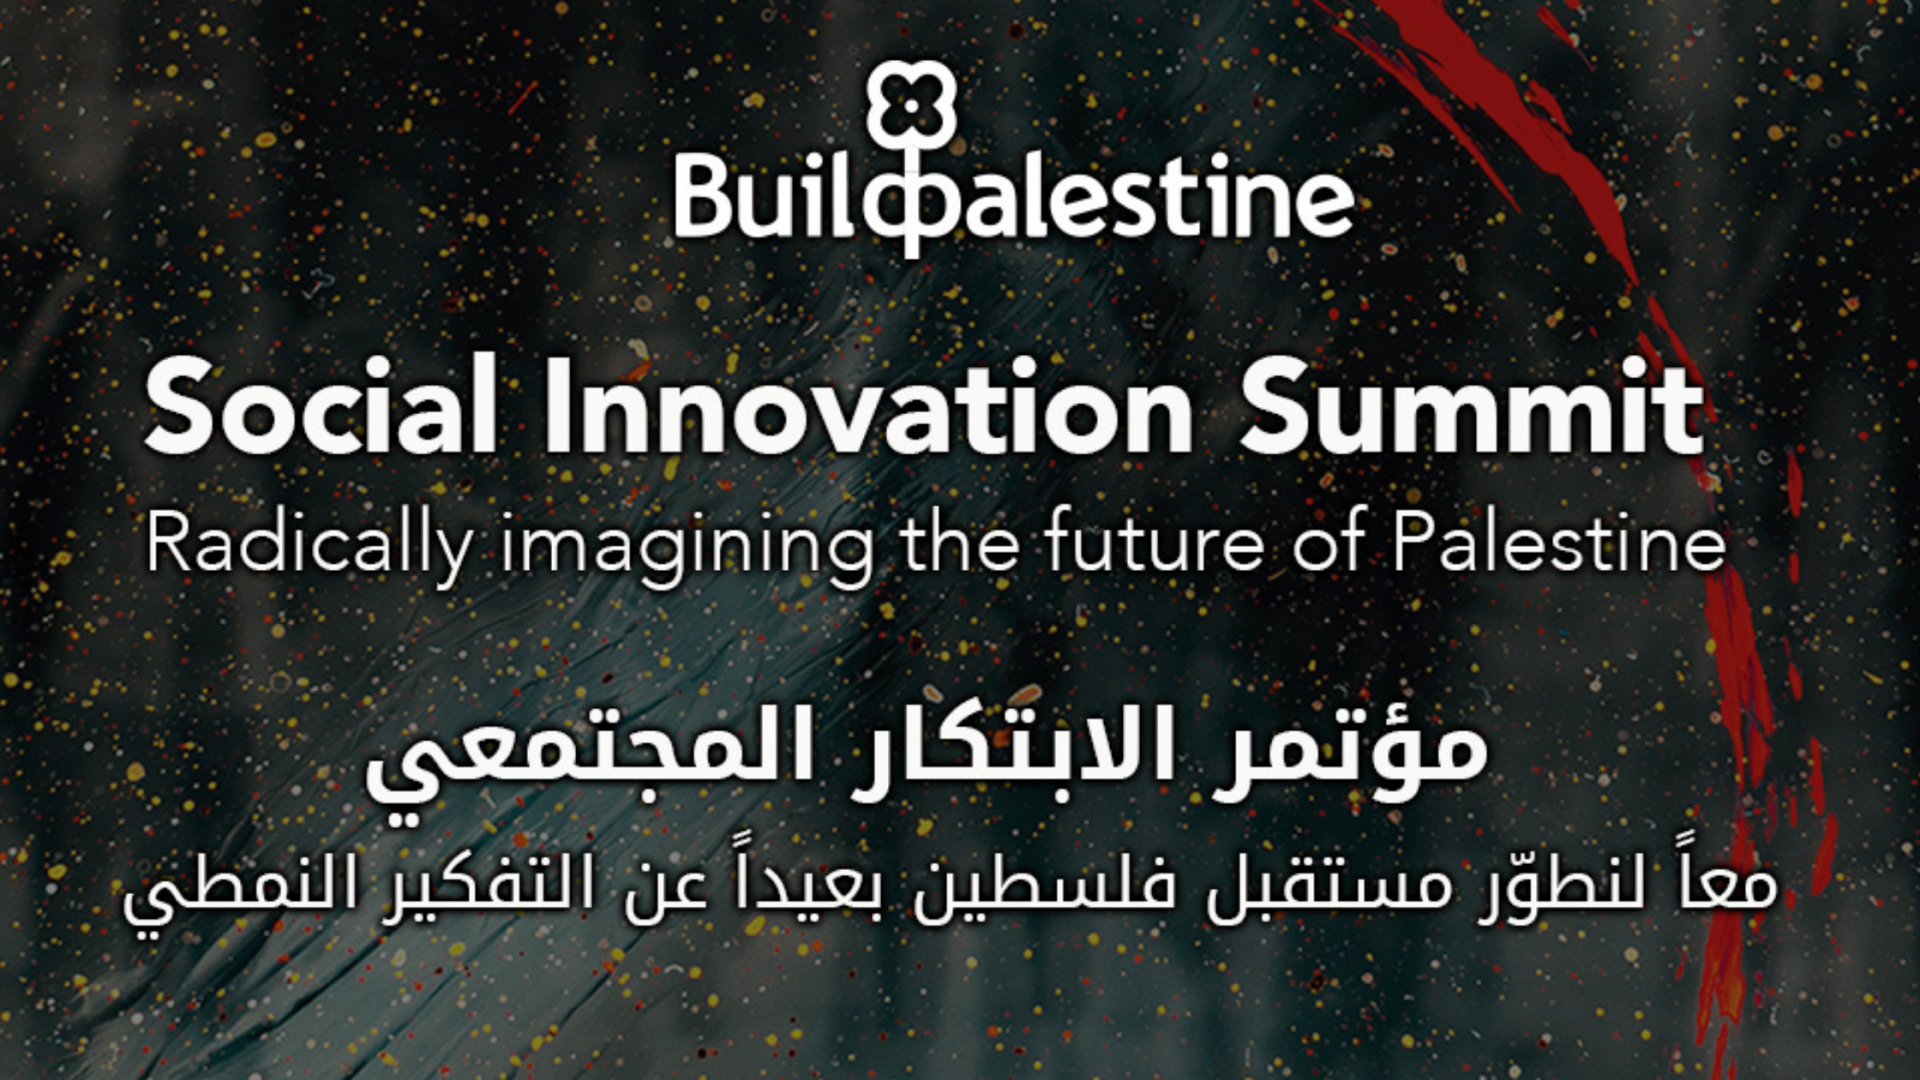 Palestinians and allies from around the world come together to radically imagine the future of Palestine